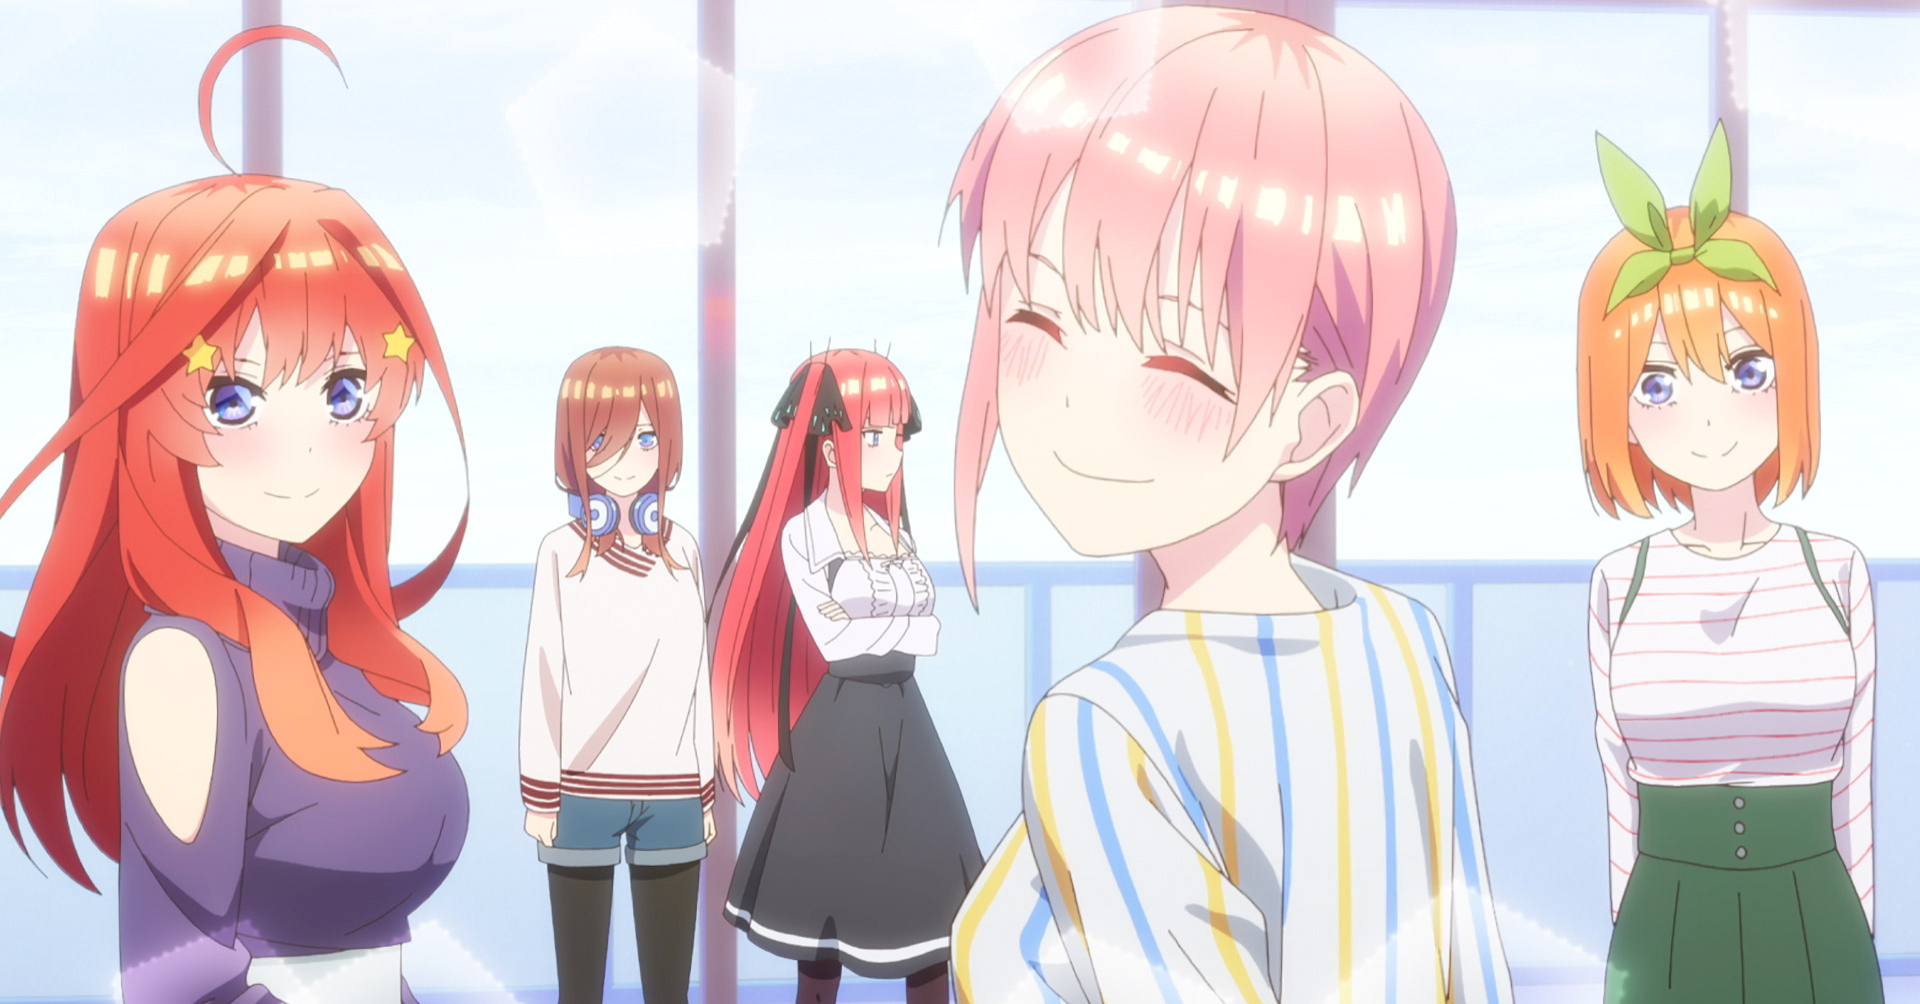 The Quintessential Quintuplets season 2: Release time for episode 1 revealed